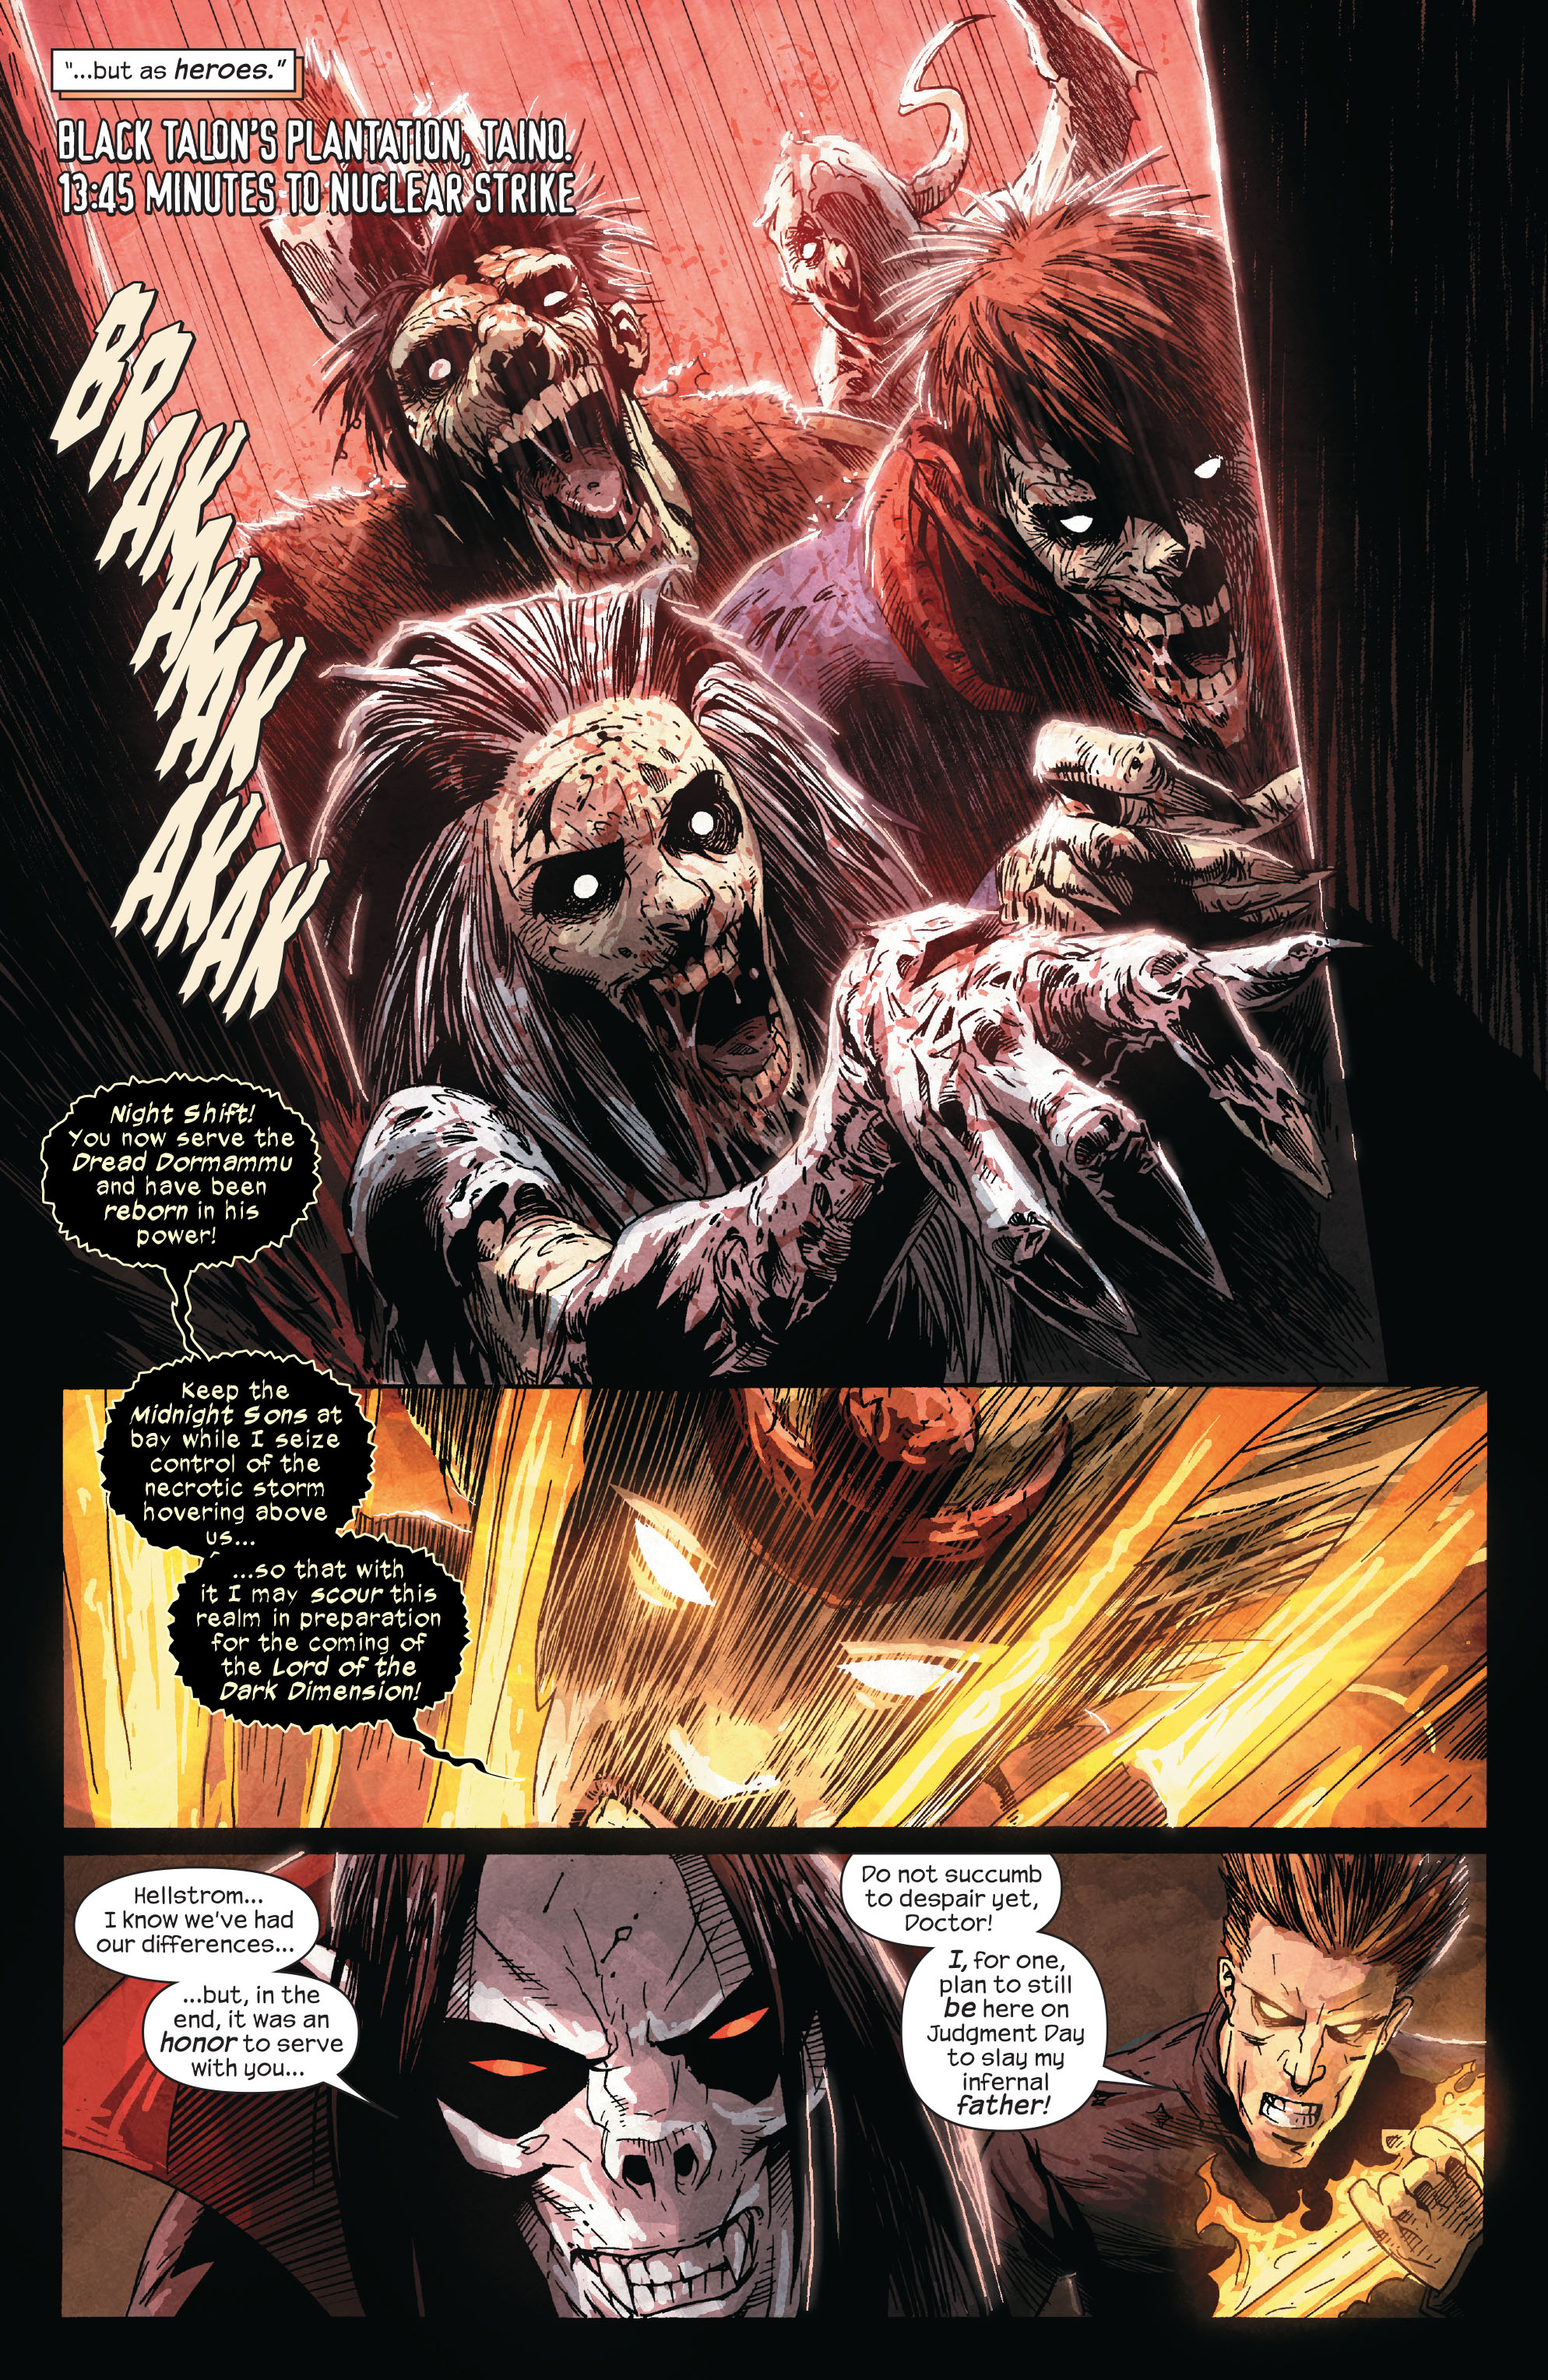 Assassins Creed Hentai Porn Taino - Marvel Zombies 4 Issue 4 | Read Marvel Zombies 4 Issue 4 comic online in  high quality. Read Full Comic online for free - Read comics online in high  quality .